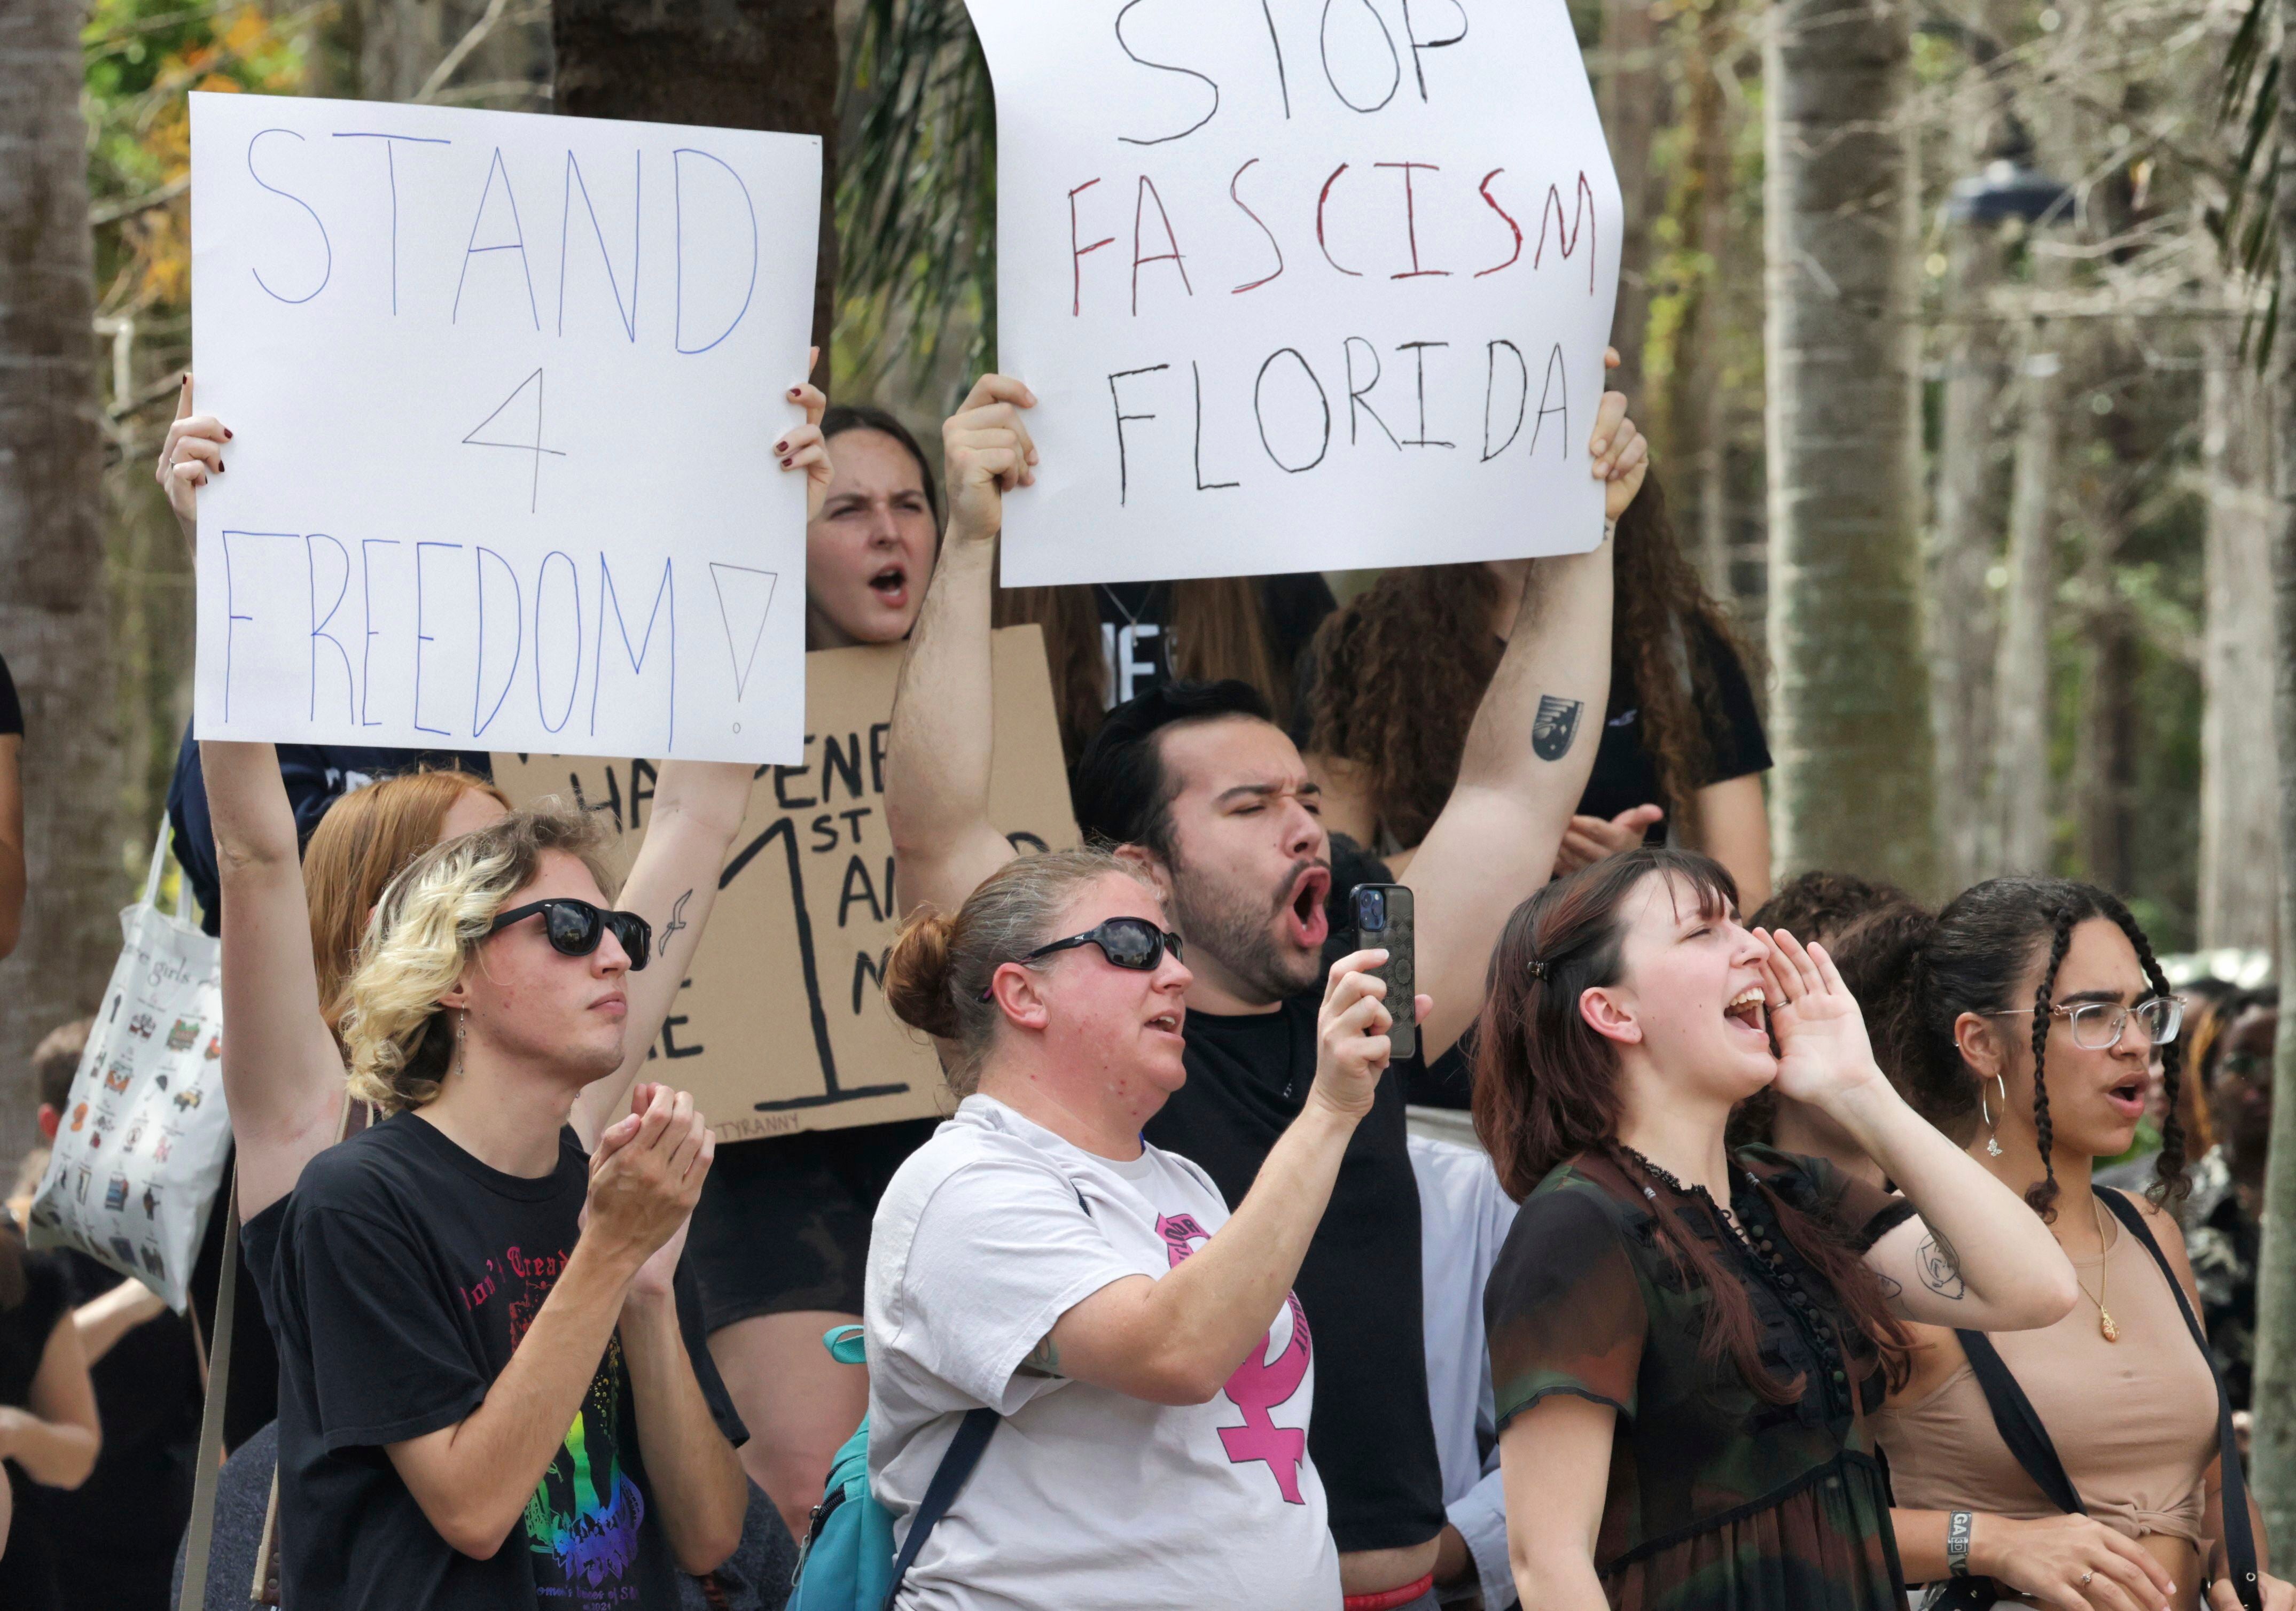 University of Central Florida students and supporters join protests against the DeSantis administration on 23 February.